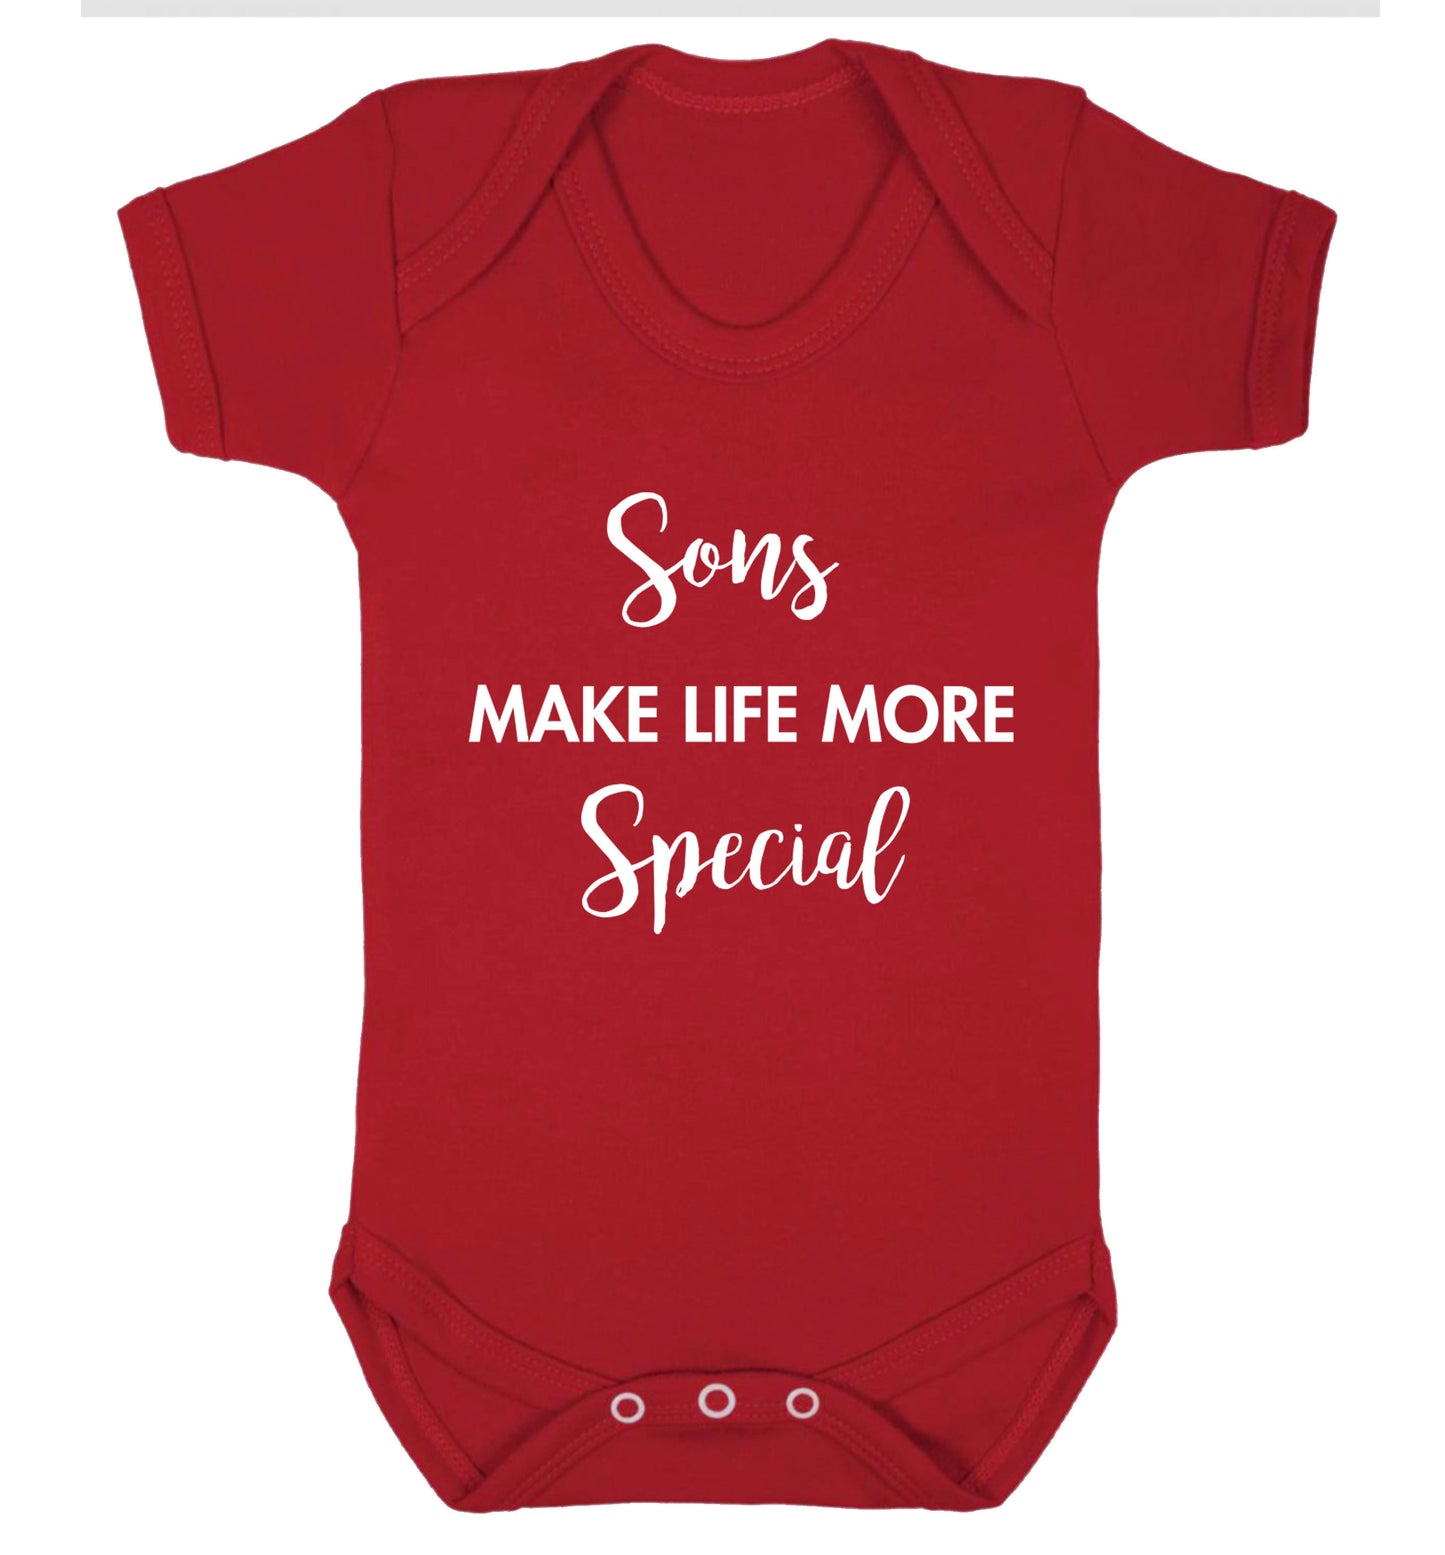 Daughters make life more special Baby Vest red 18-24 months